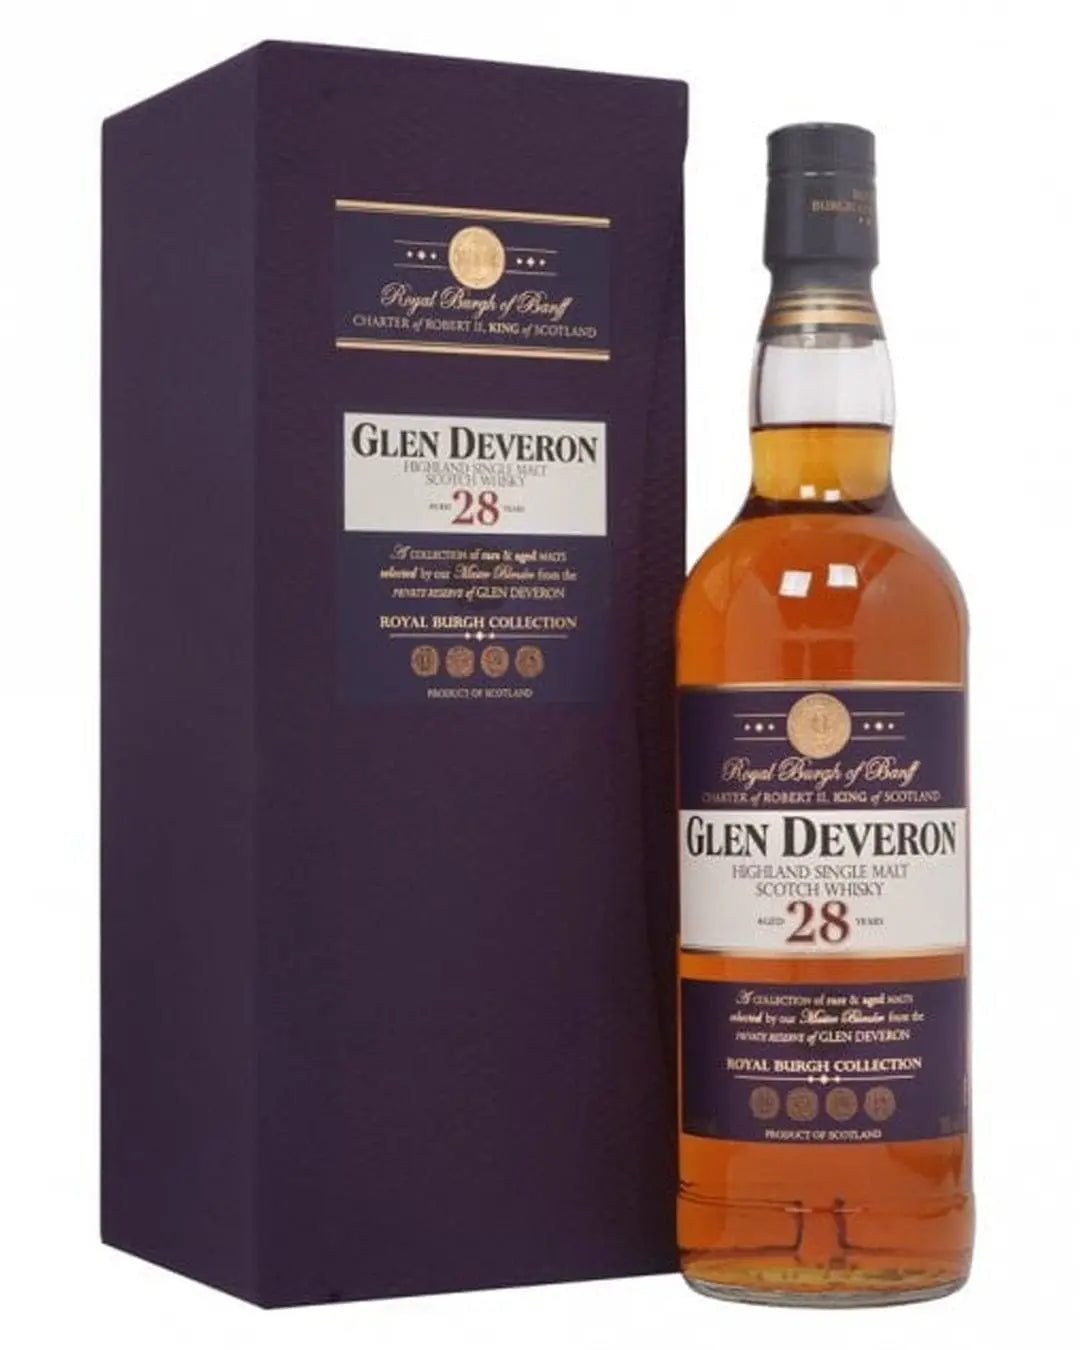 Glen Deveron 28 Year Old Royal Burgh Collection whisky, 70 cl Whisky